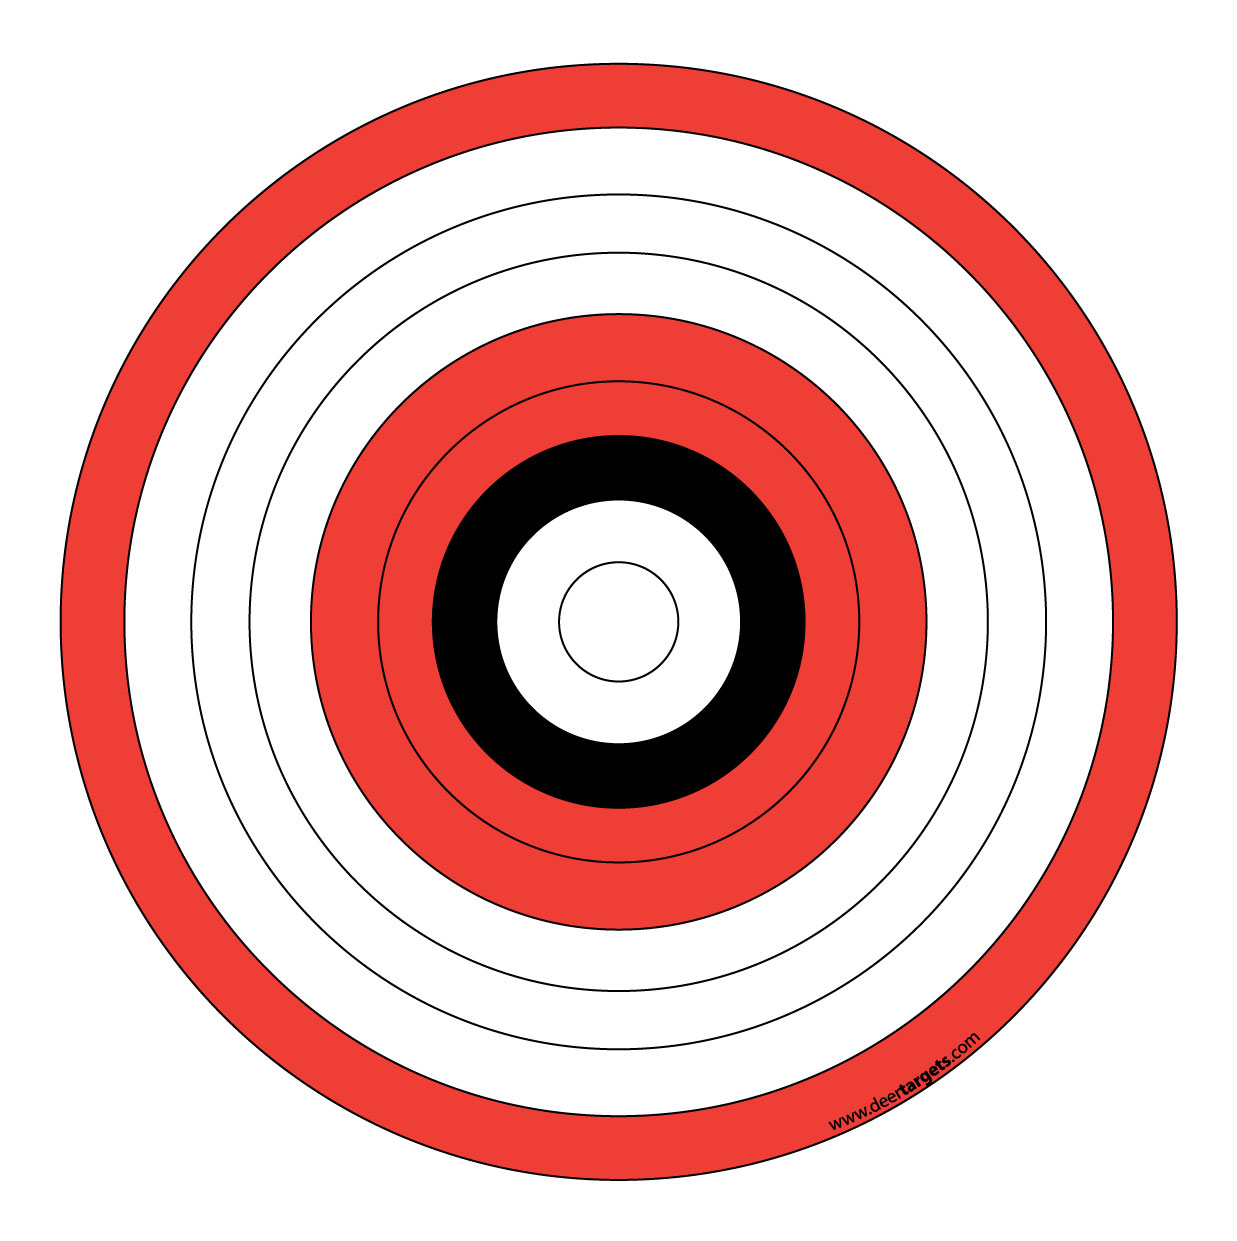 Bullseye clipart practice target. Free archery cliparts download